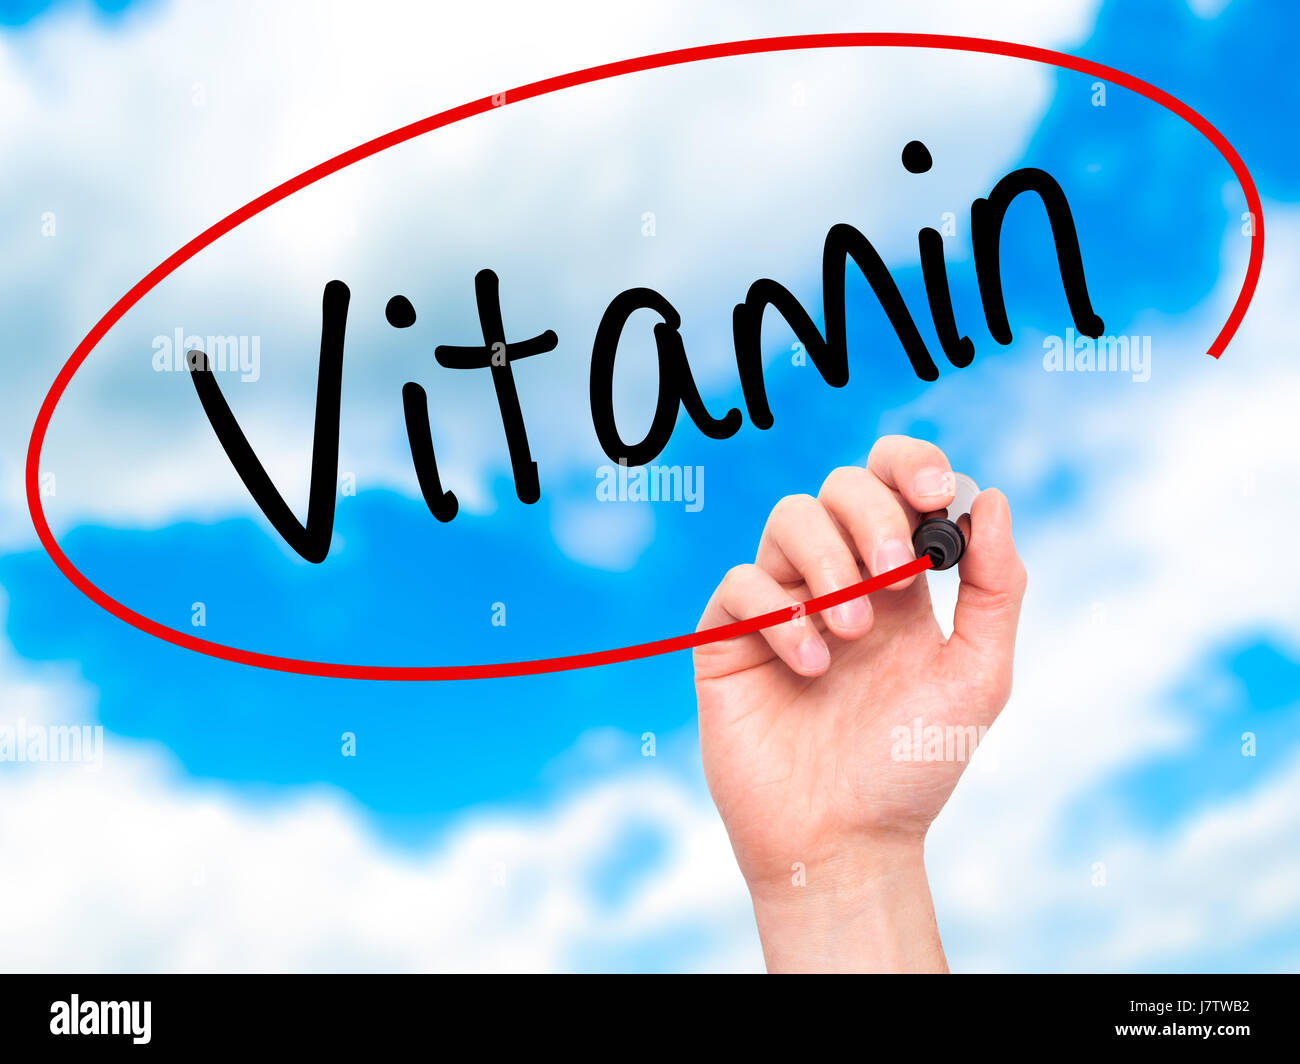 B3 vitamin foods Cut Out Stock Images & Pictures - Alamy